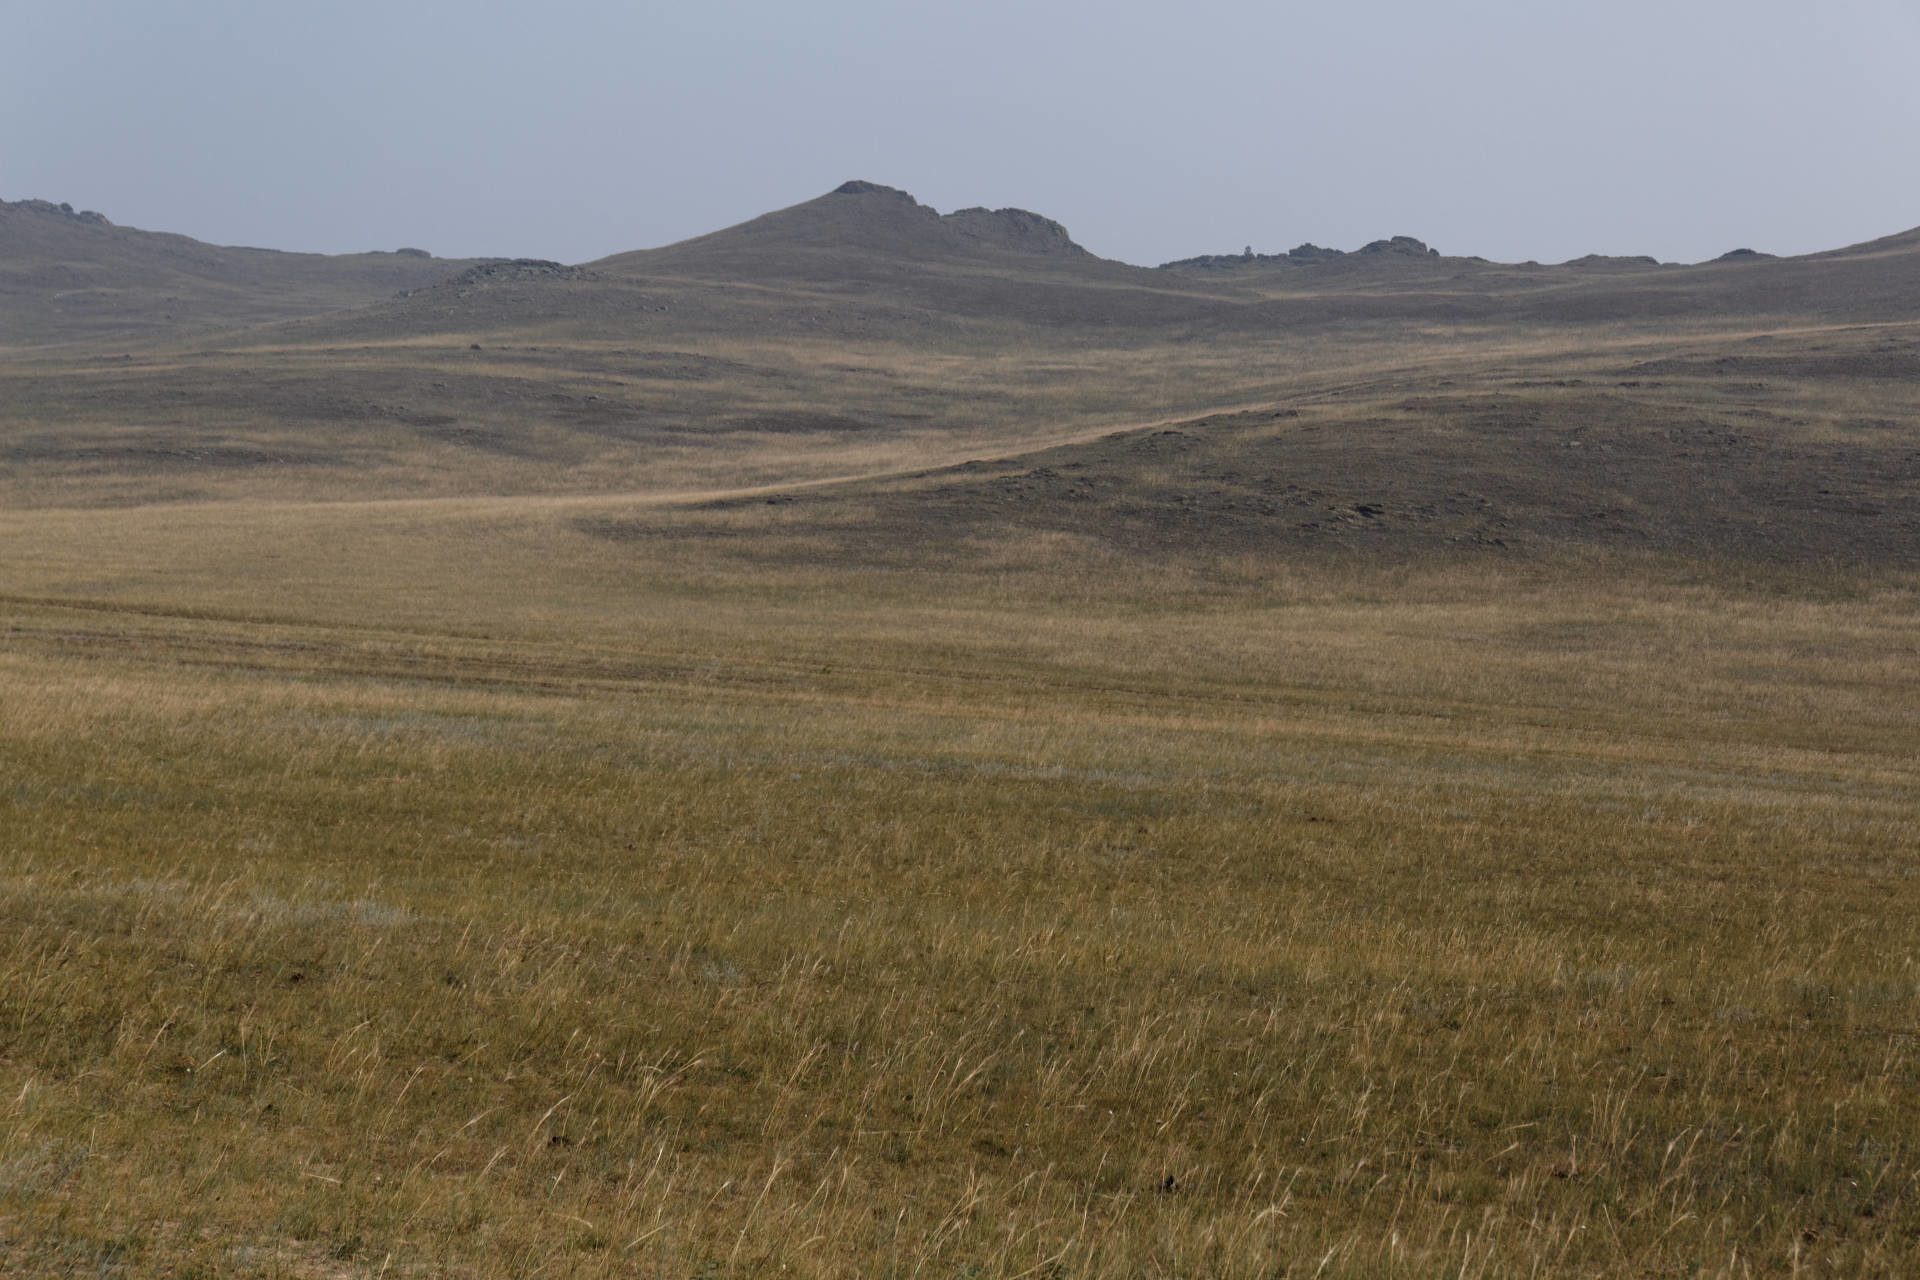 Vast open steppe with mountains in distance